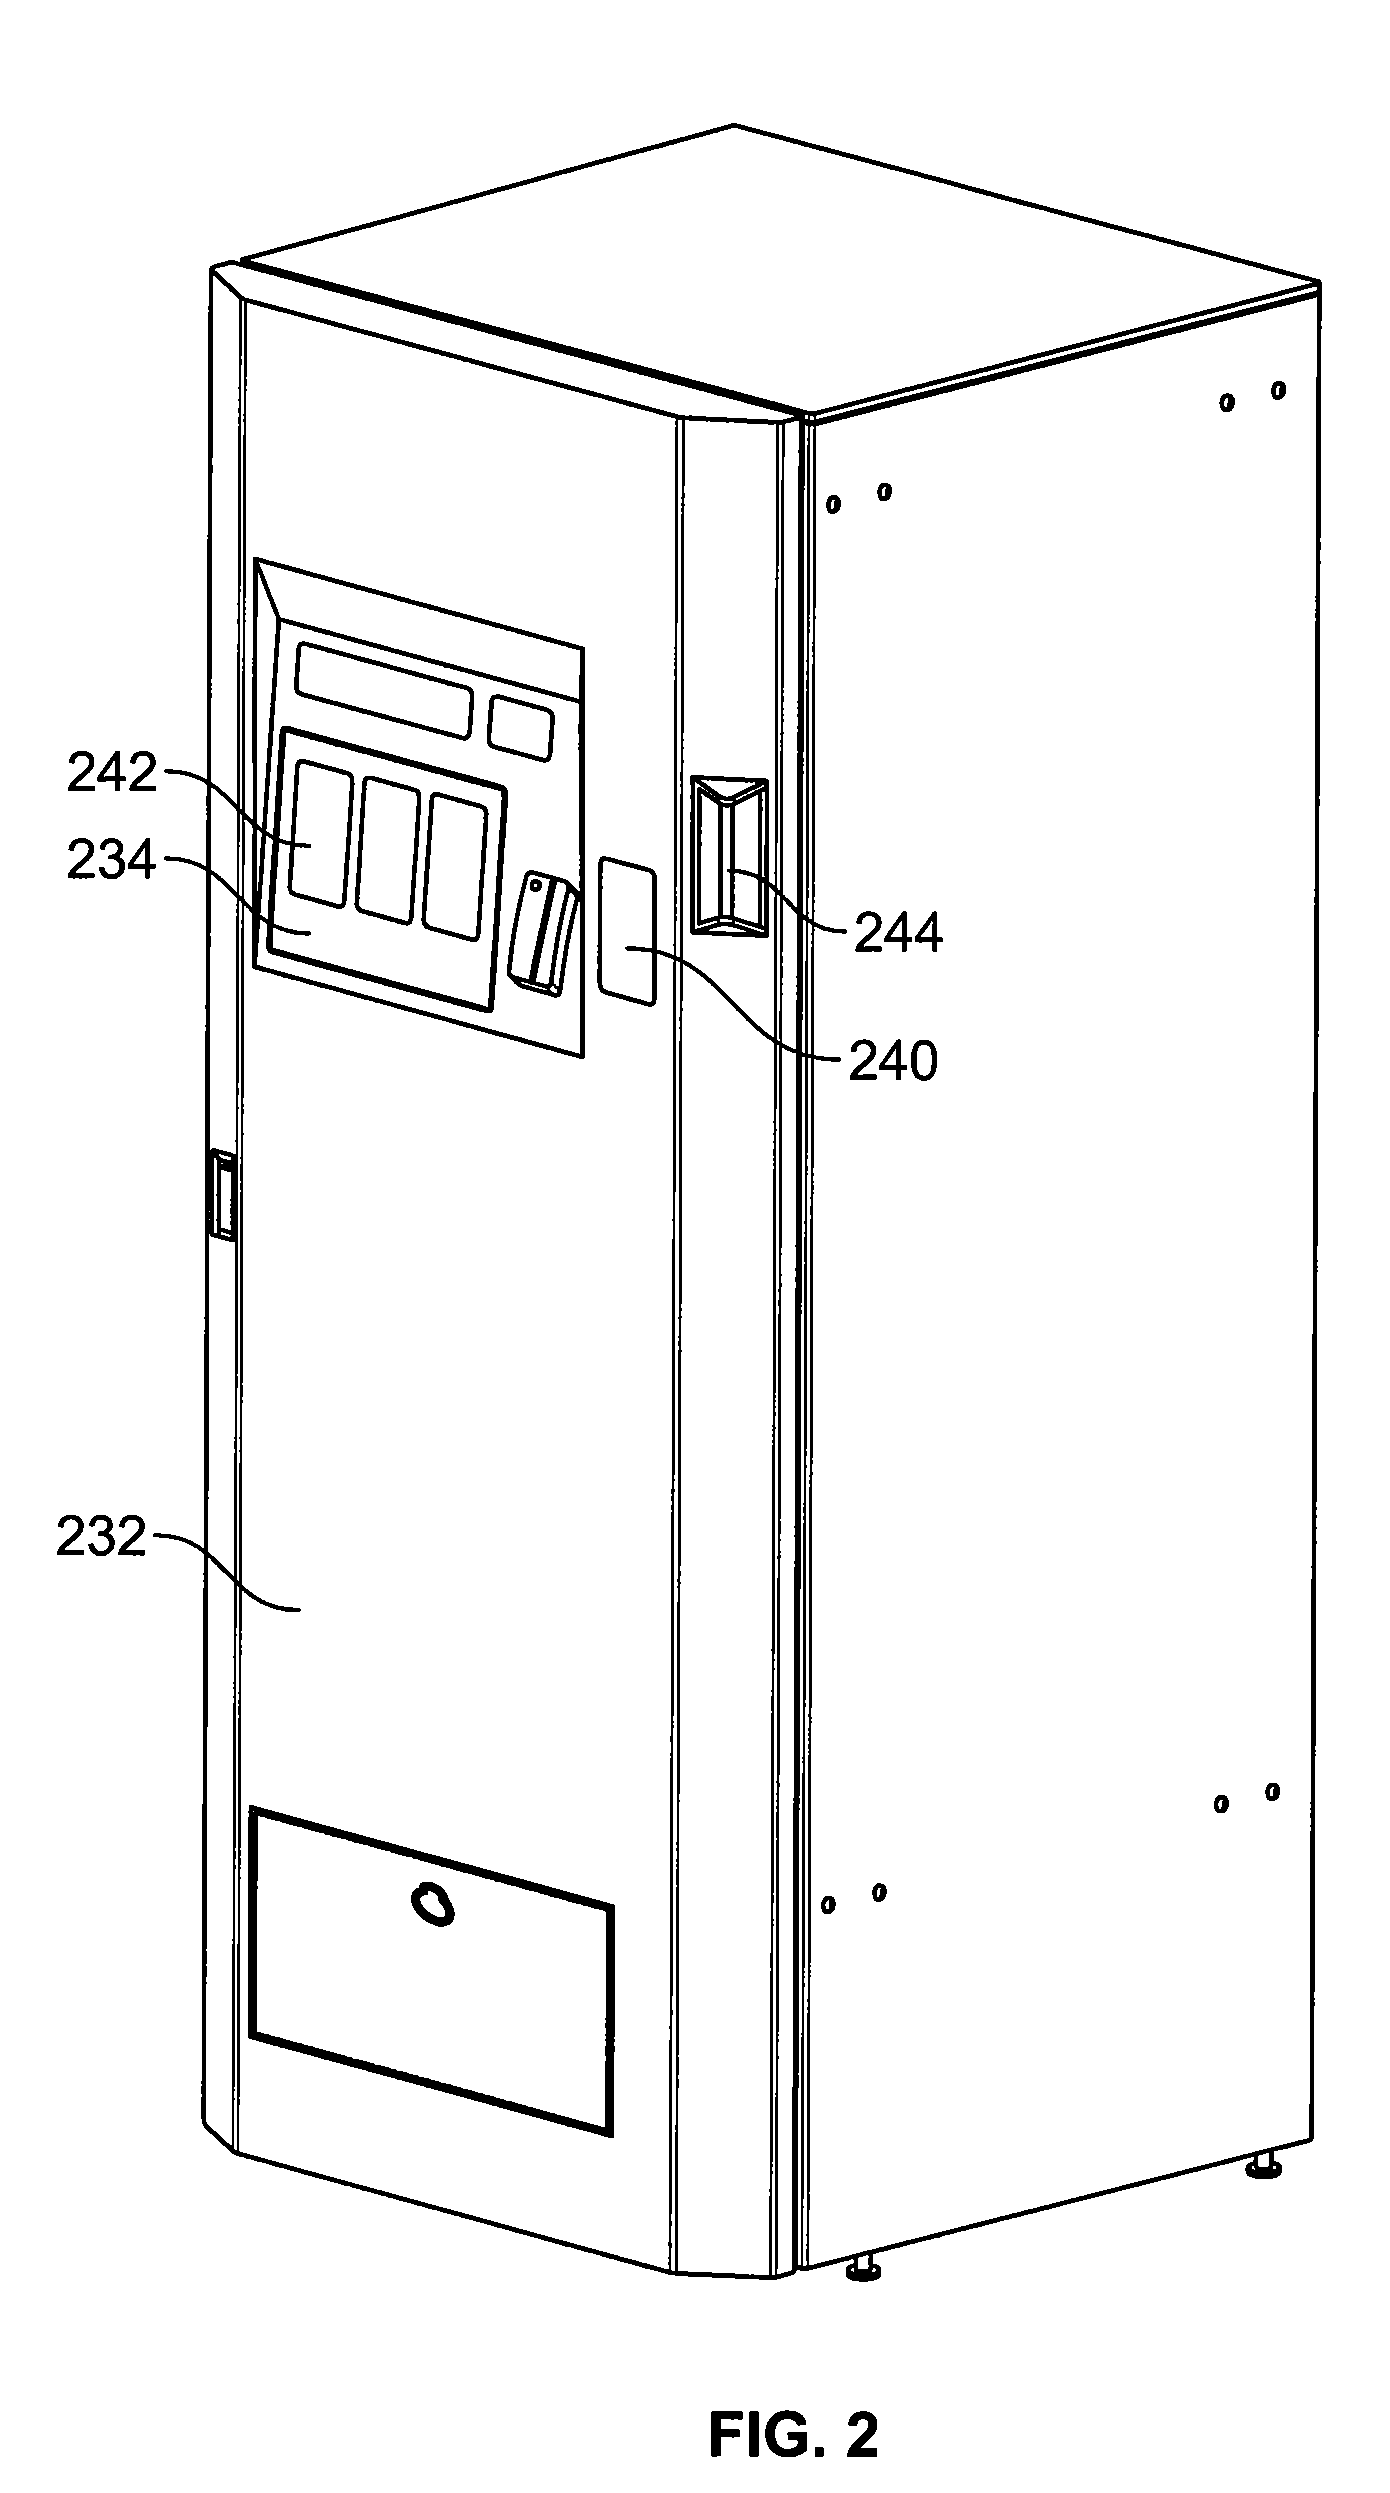 Article Vending Machine And Method for Auditing Inventory While Article Vending Machine Remains Operational